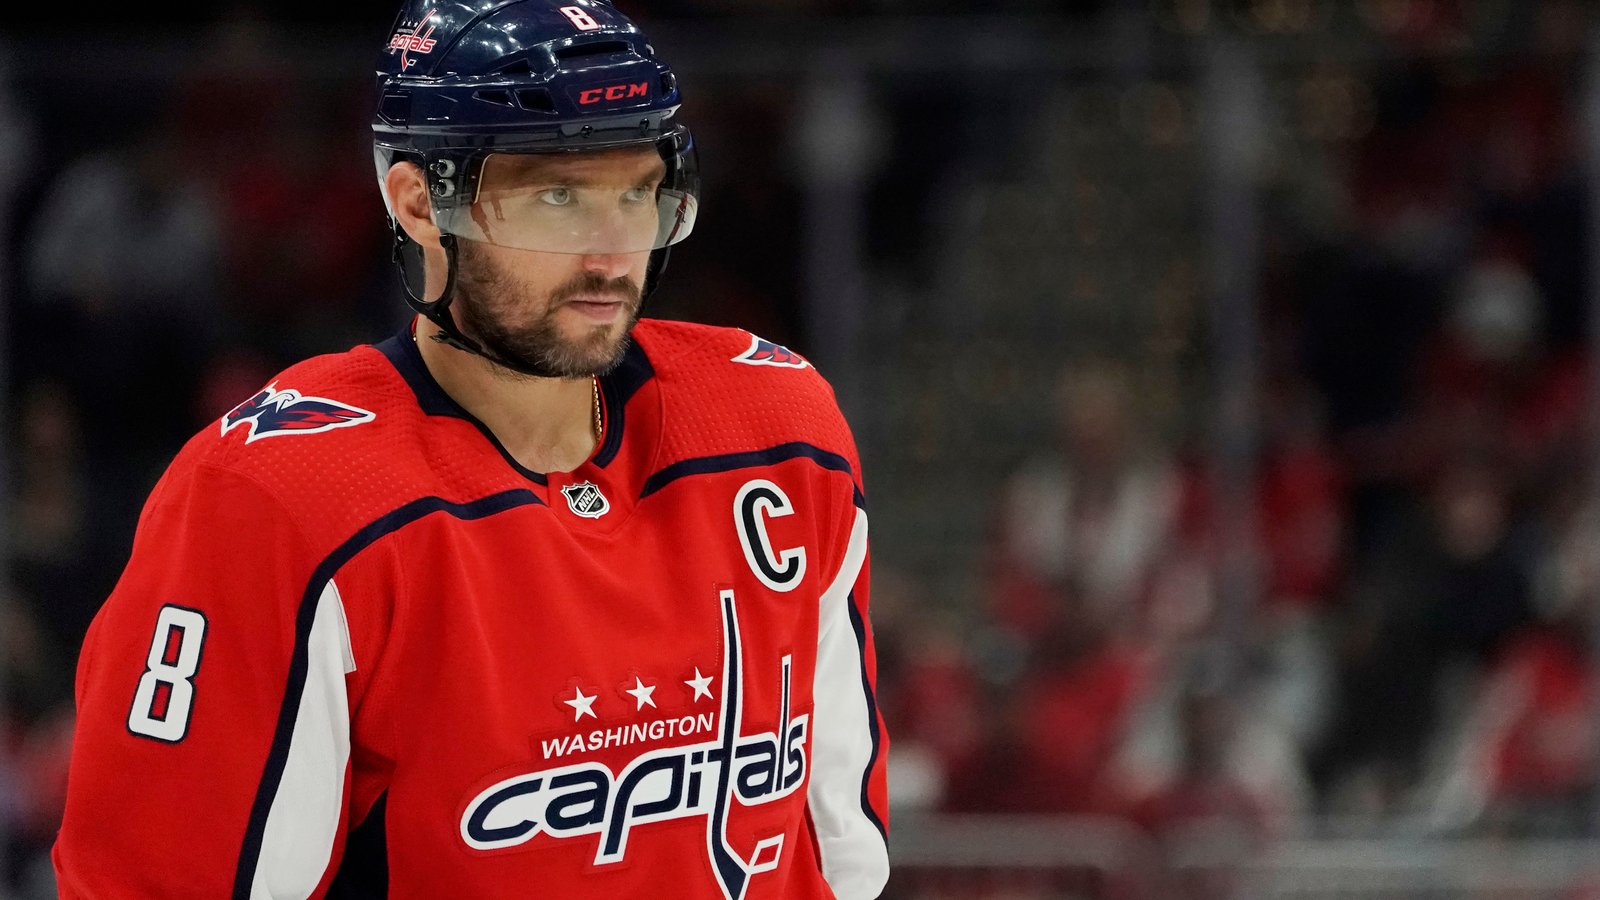 Alex Ovechkin represents himself to get new deal done